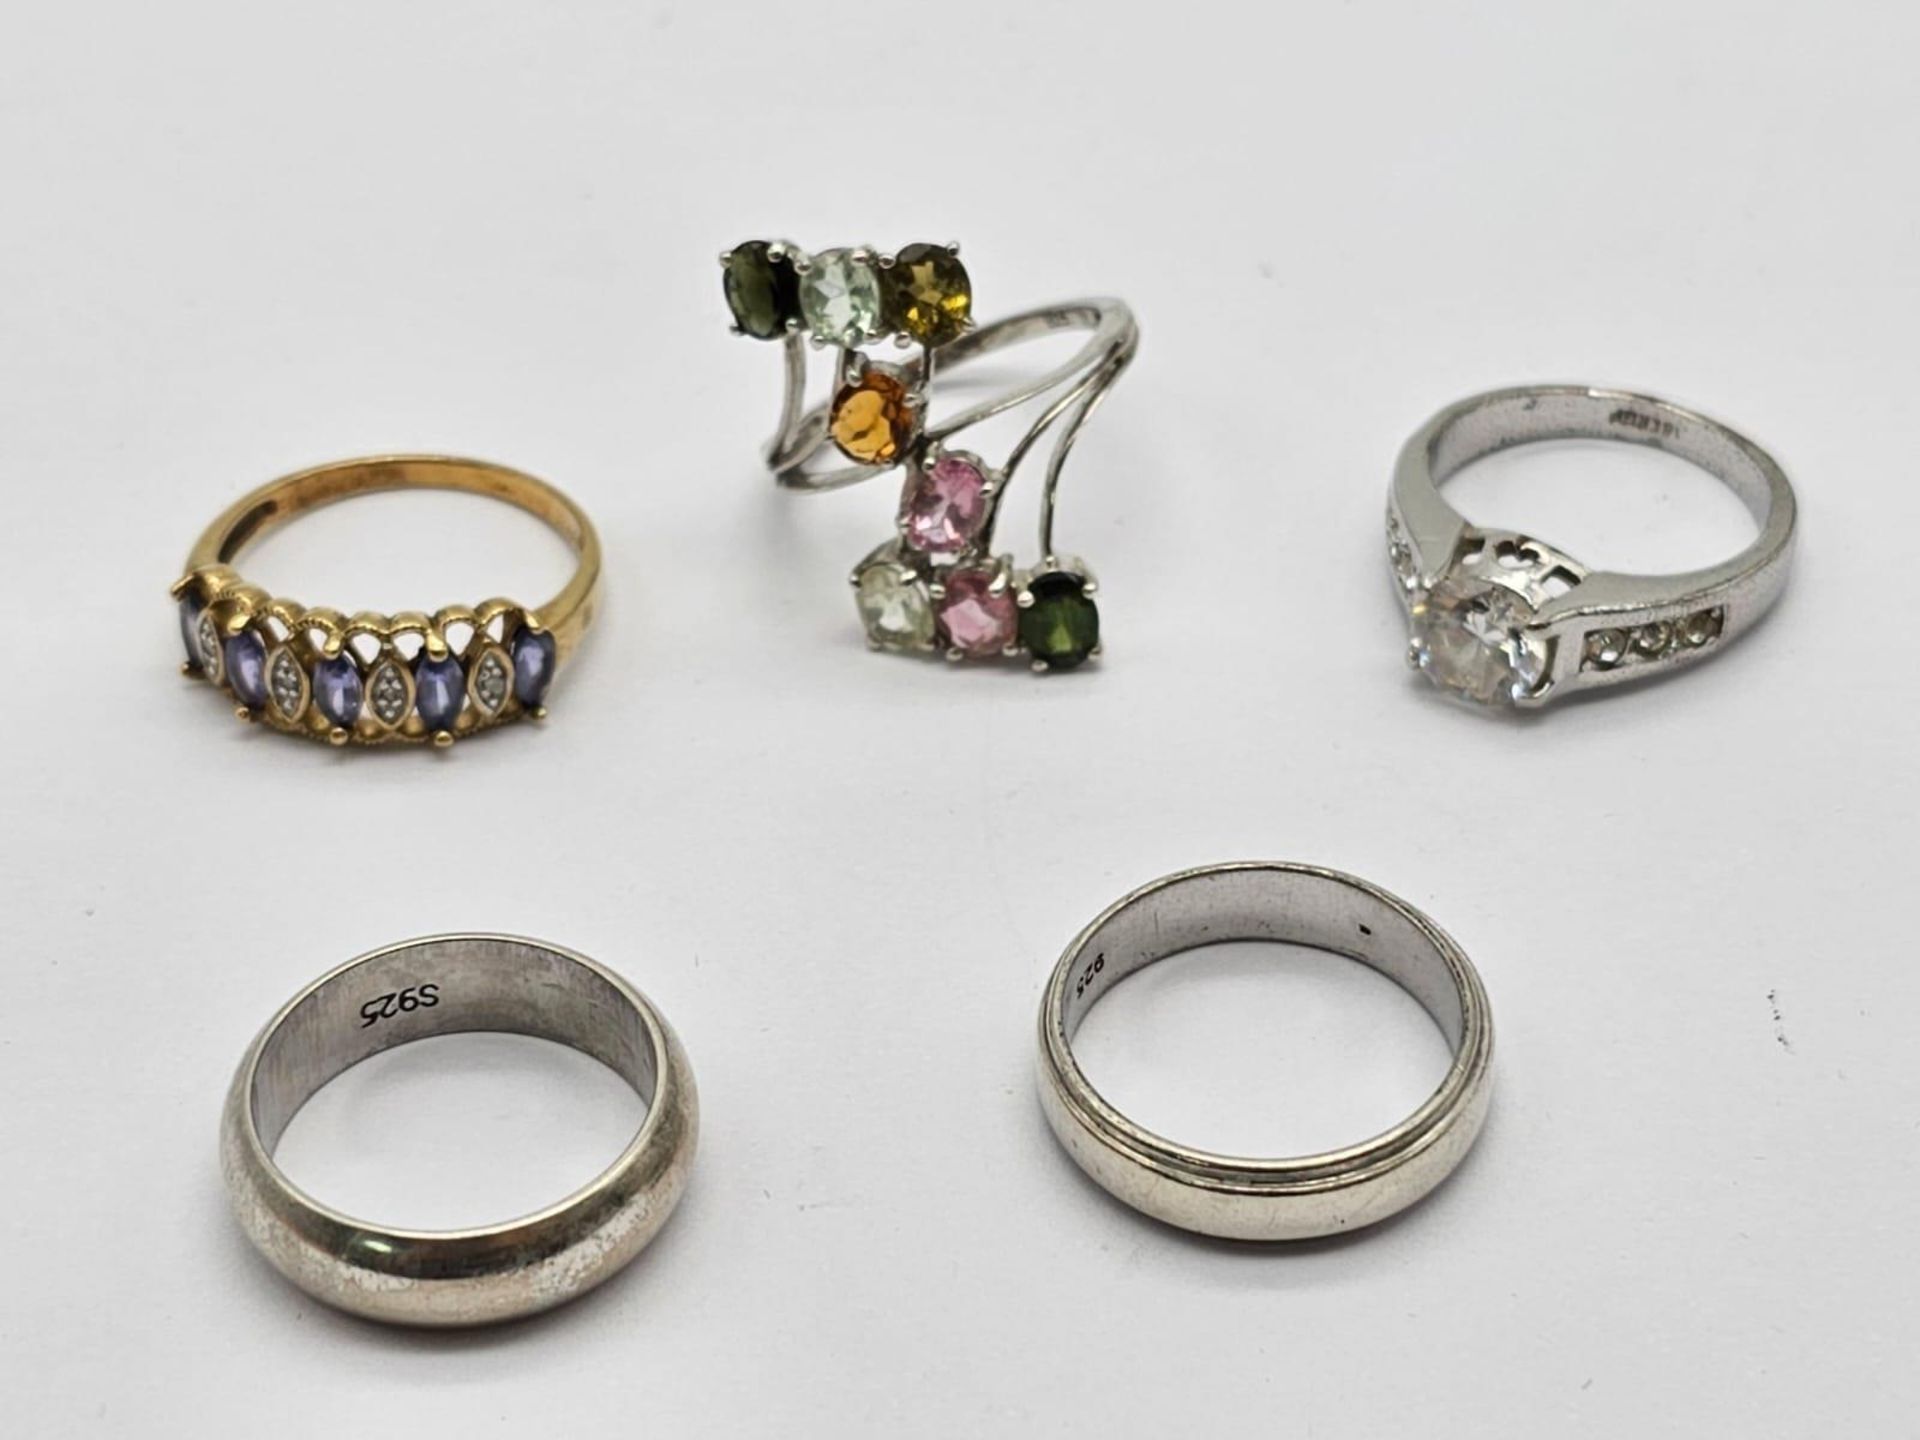 Five 925 Silver Rings. Three with brightly coloured stones and two band. 2 x N, 2 x O, 1 x P.